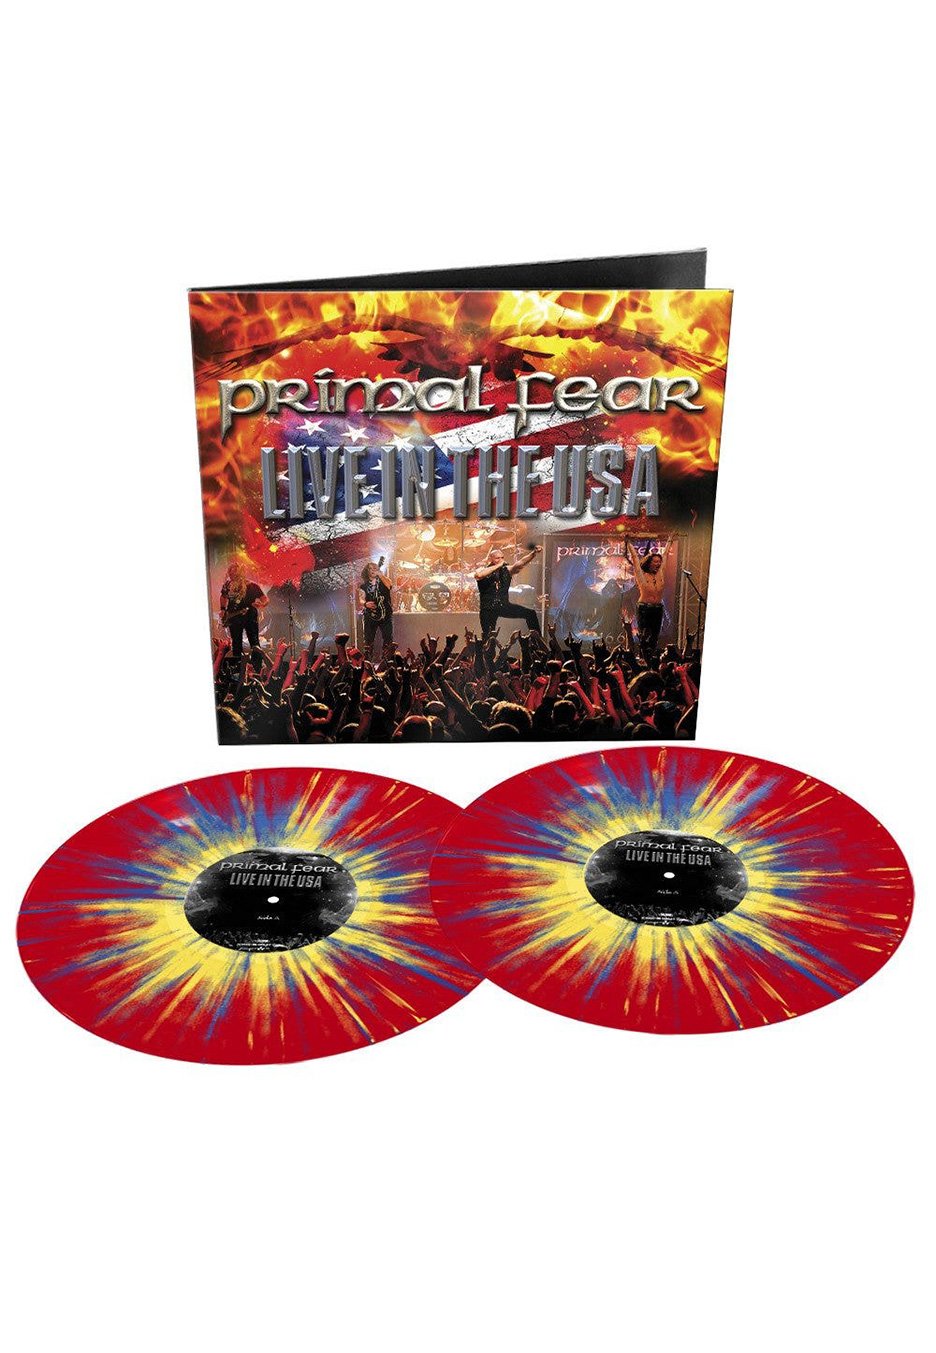 Primal Fear - Live In The Usa Red/Yellow/Blue - Splattered 2 Vinyl